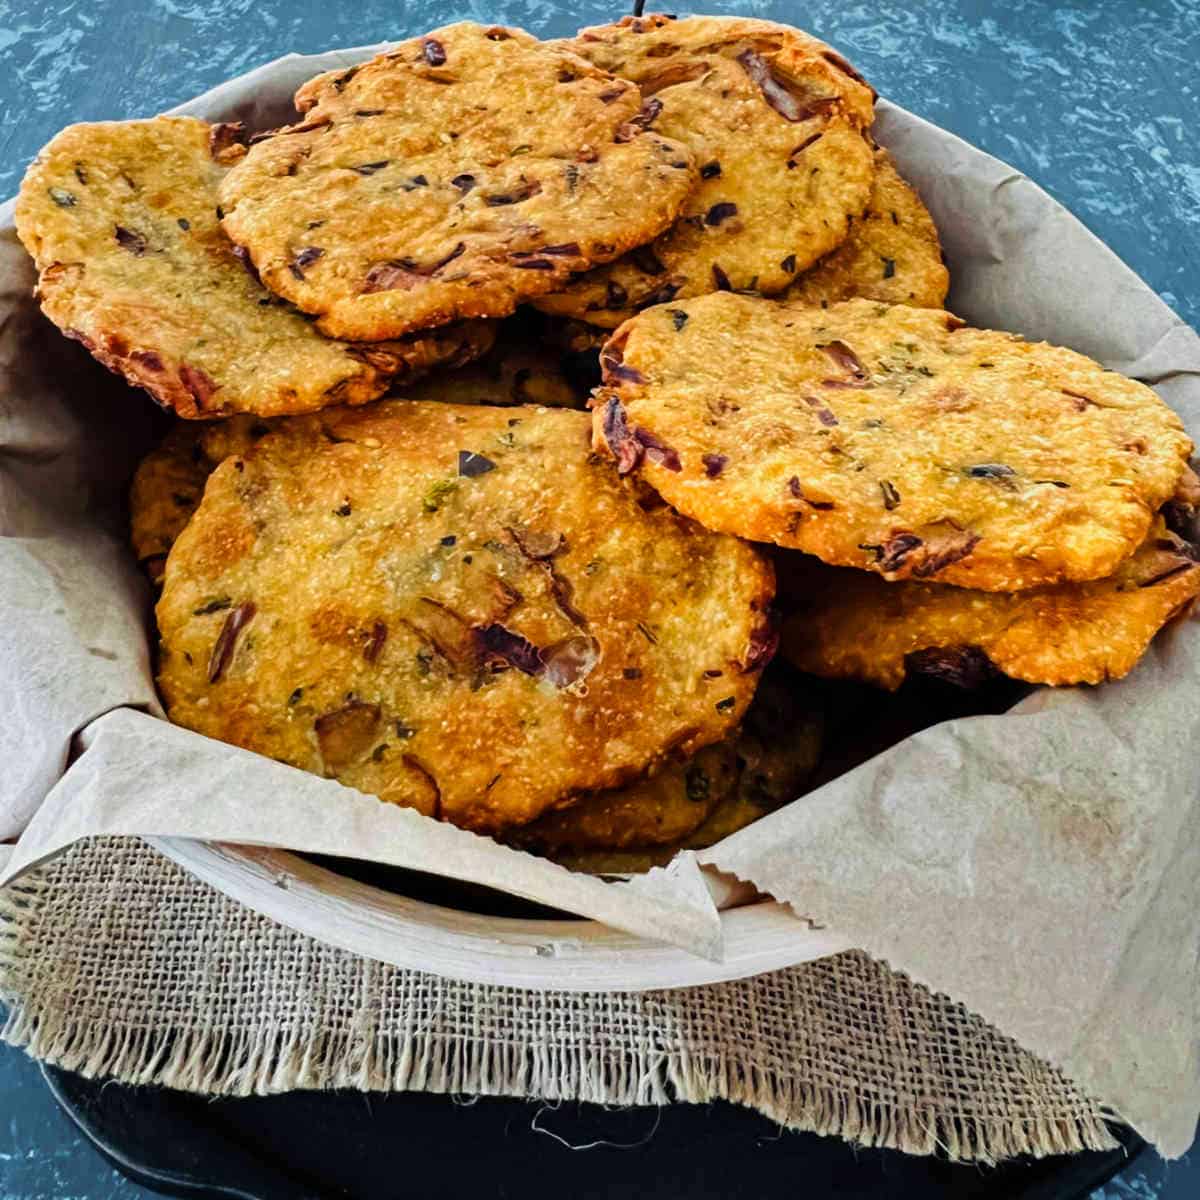 Maddur vada placed on a parchment paper inside a jute basket.